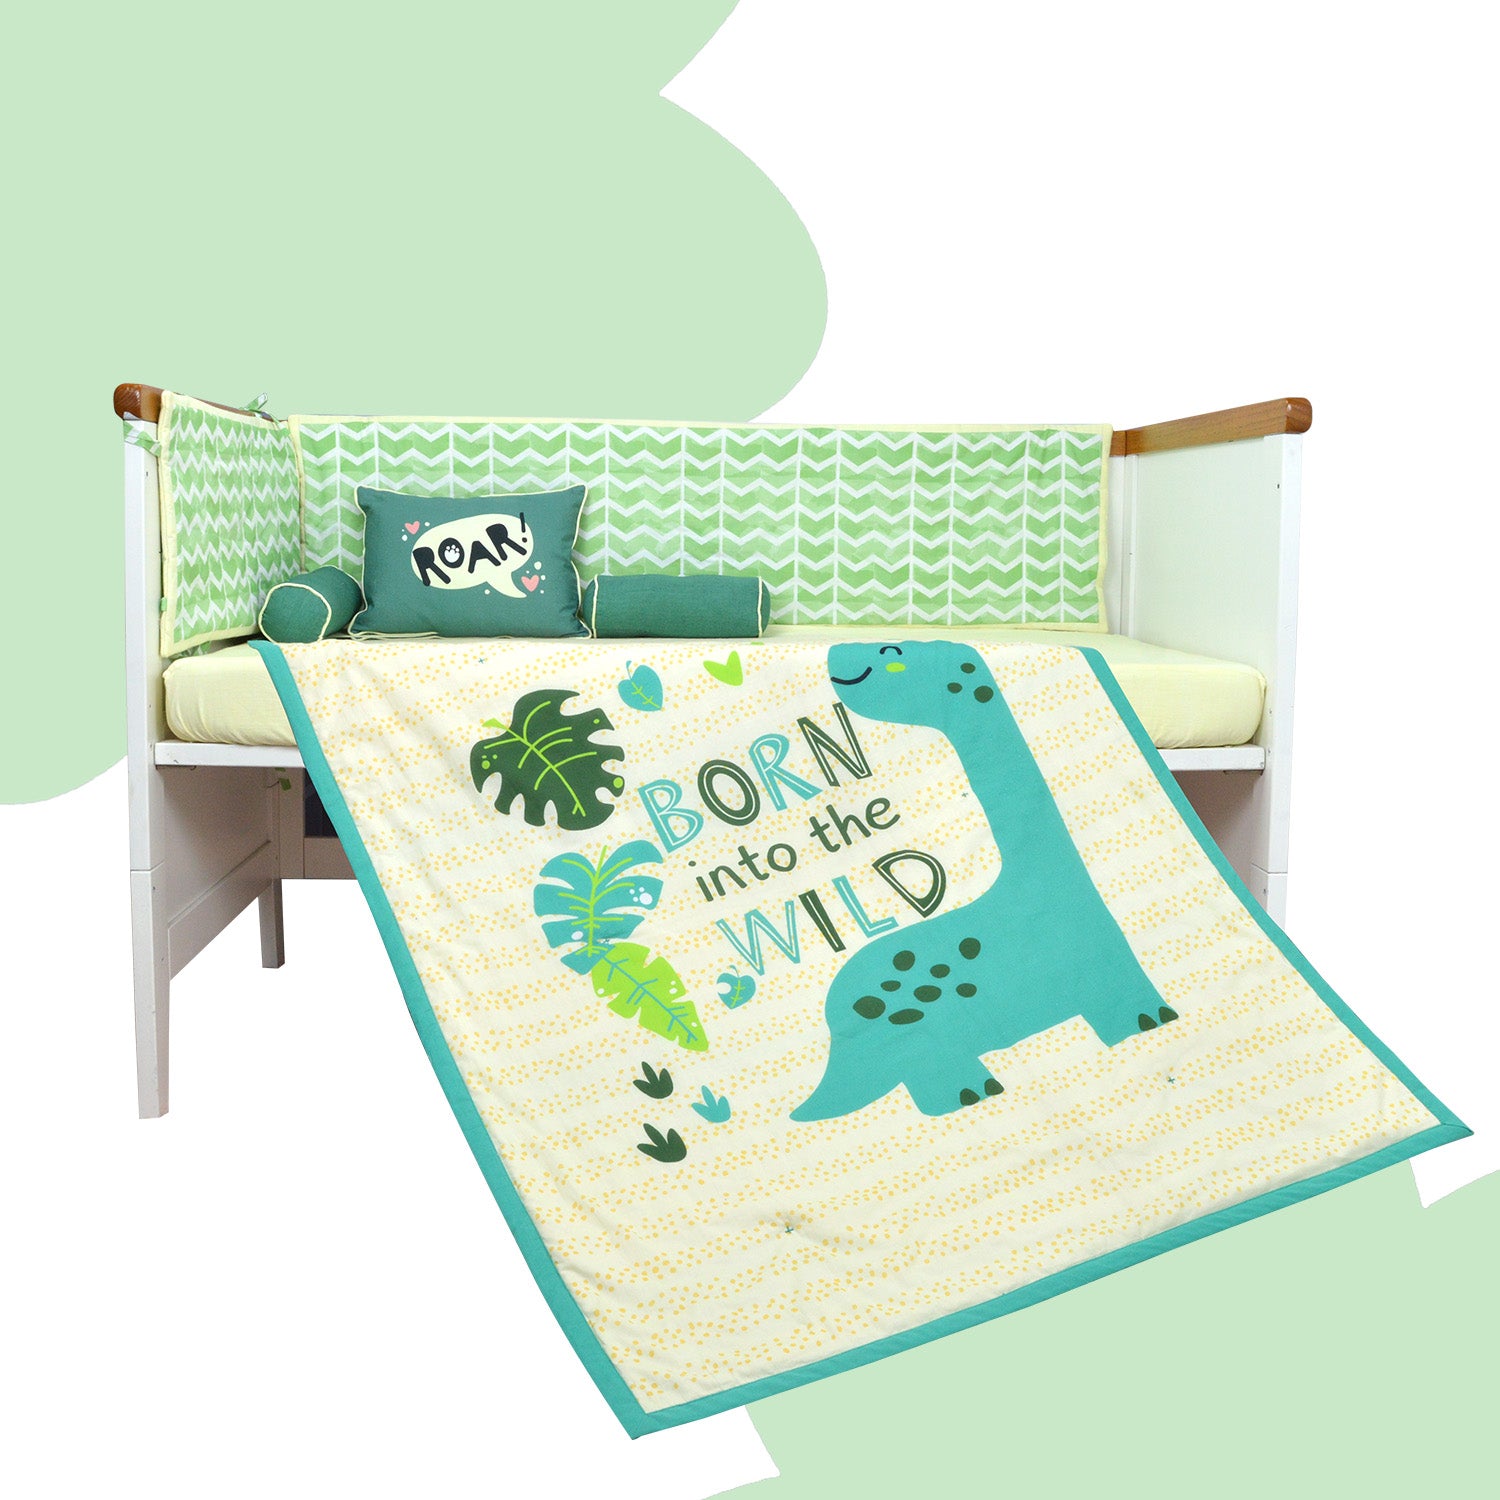 Cotton Crib Set-Complete Baby Bedding Bundle:Blanket, Pillow, Cot Bumper, Bolster, Fitted Sheet (Jurassic Baby)